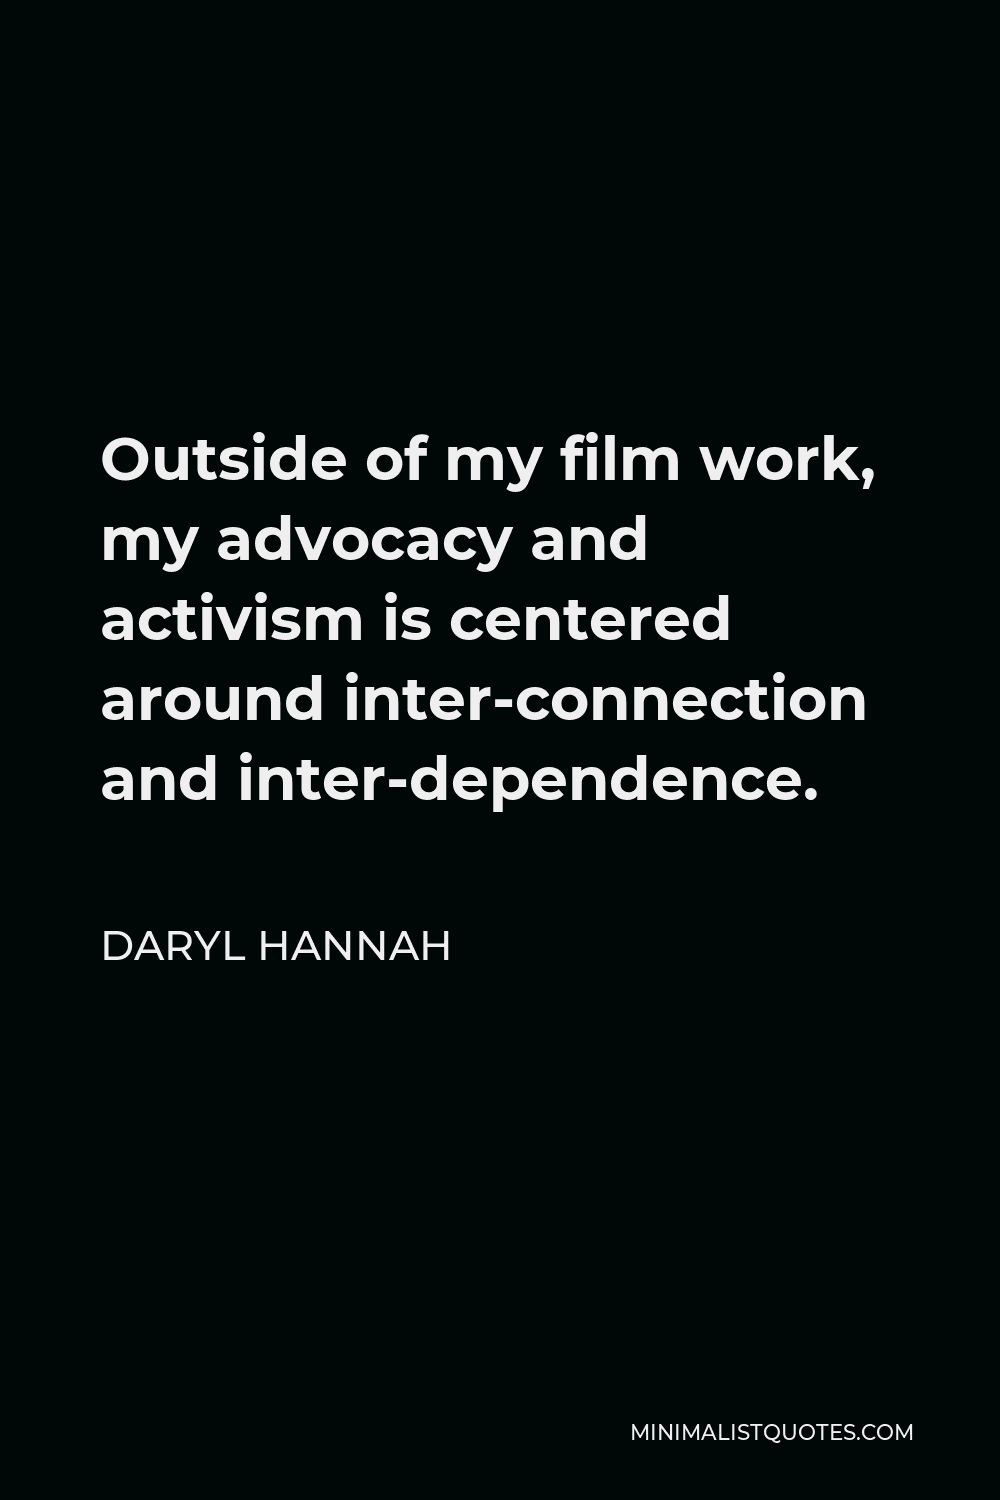 Daryl Hannah Quote - Outside of my film work, my advocacy and activism is centered around inter-connection and inter-dependence.